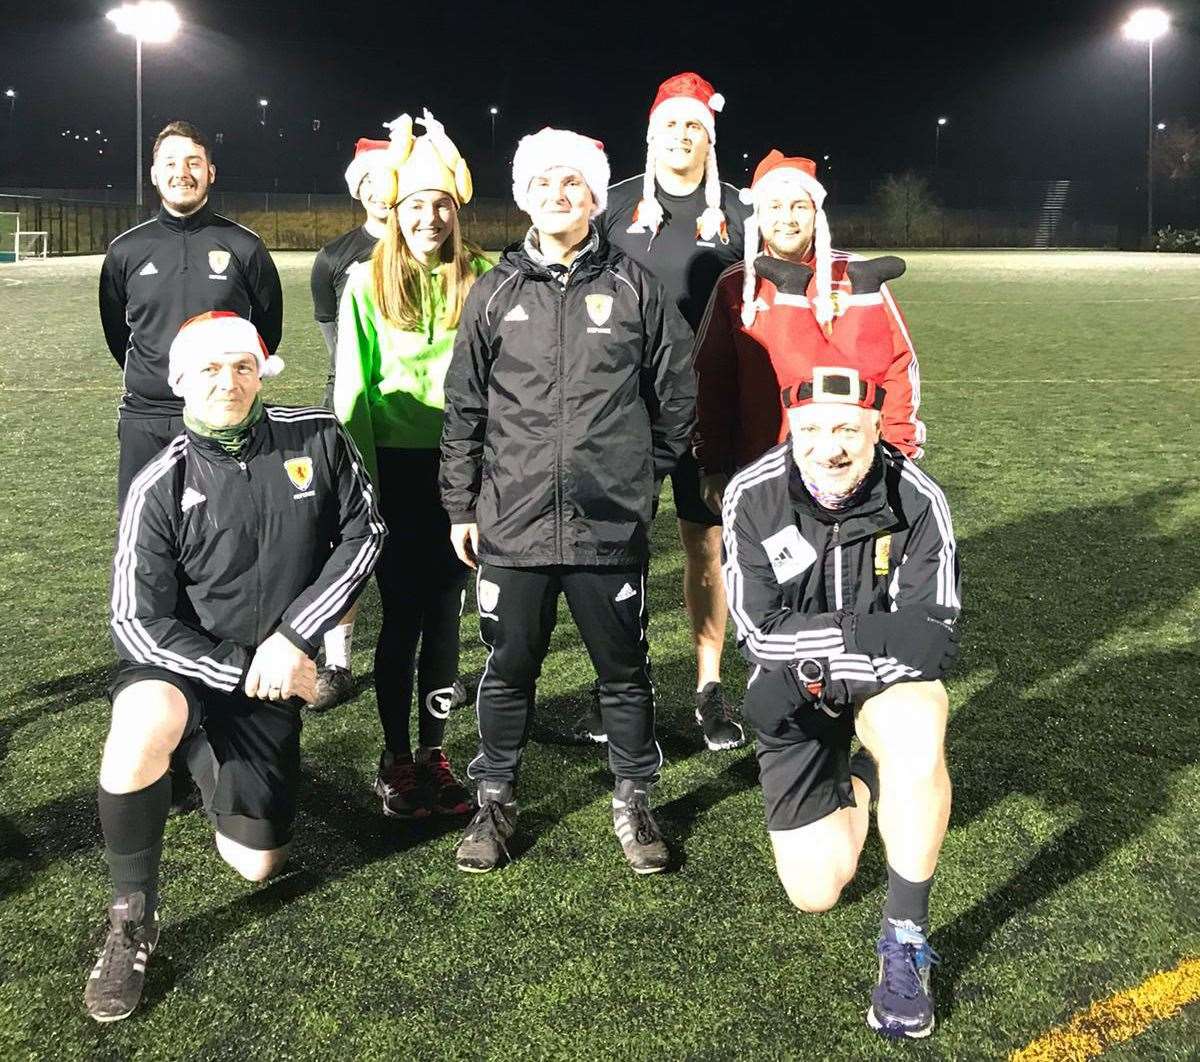 Members of the North of Scotland Referee Association who will be taking part in the Referee Reindeer Run.